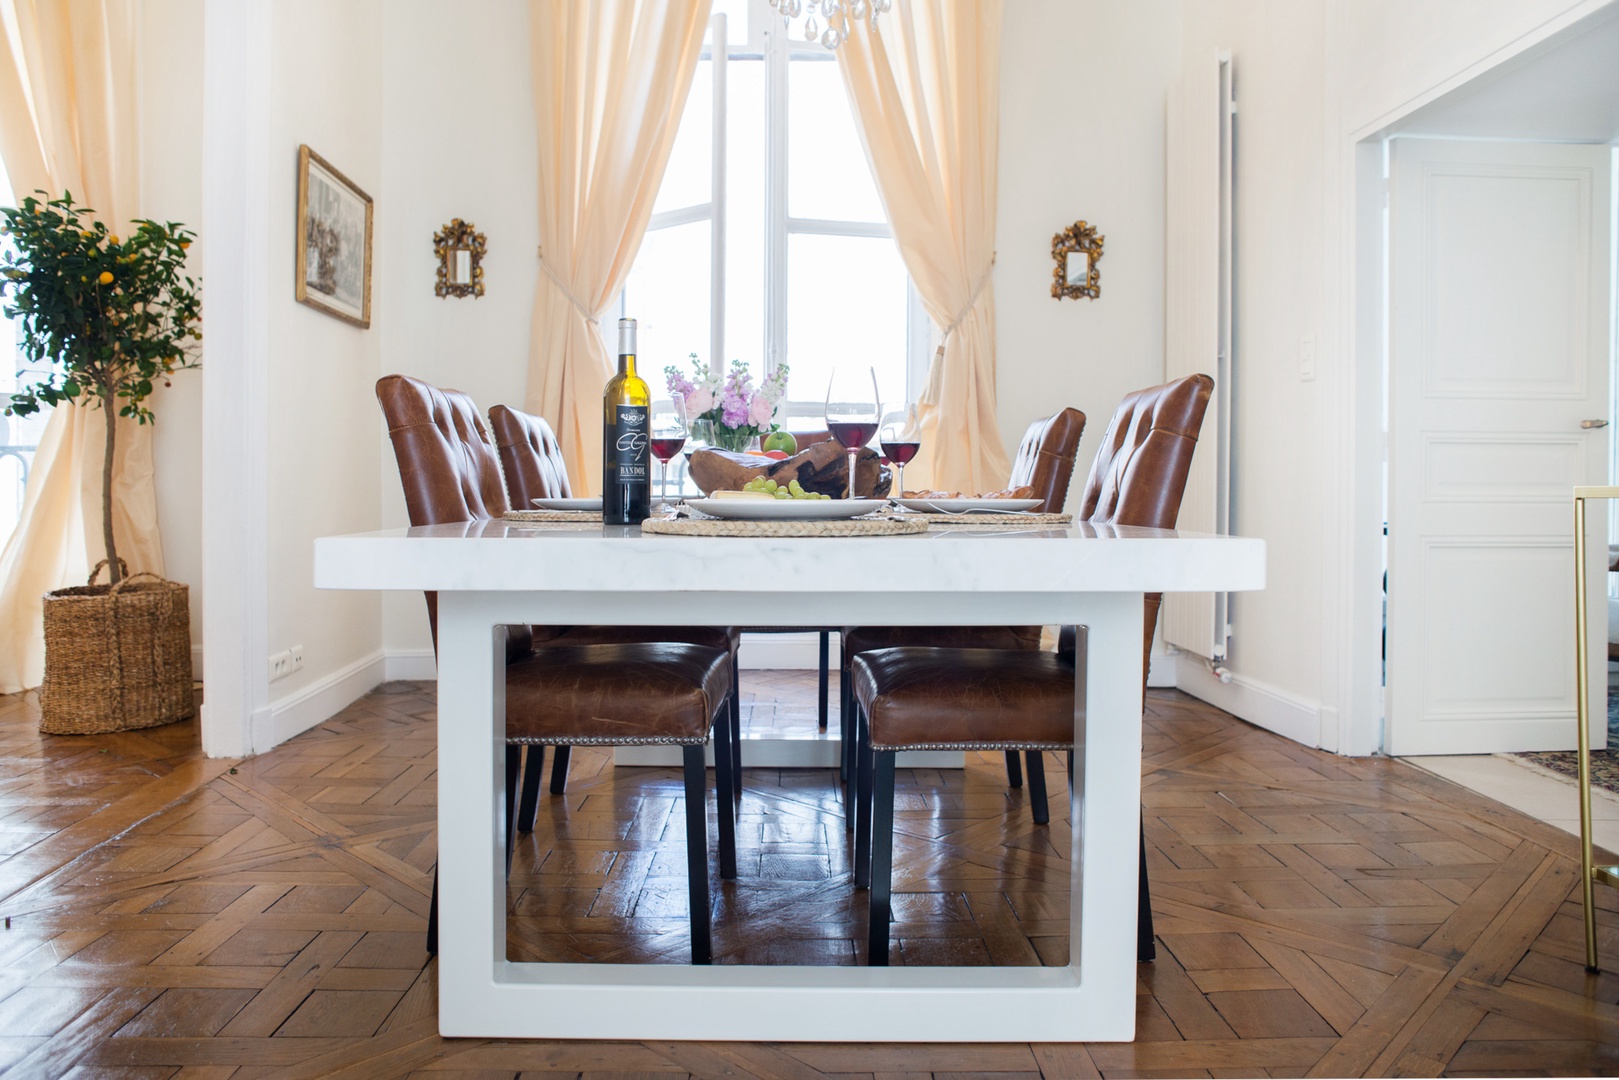 Enjoy meals in the gorgeous dining room with plenty of space to entertain.